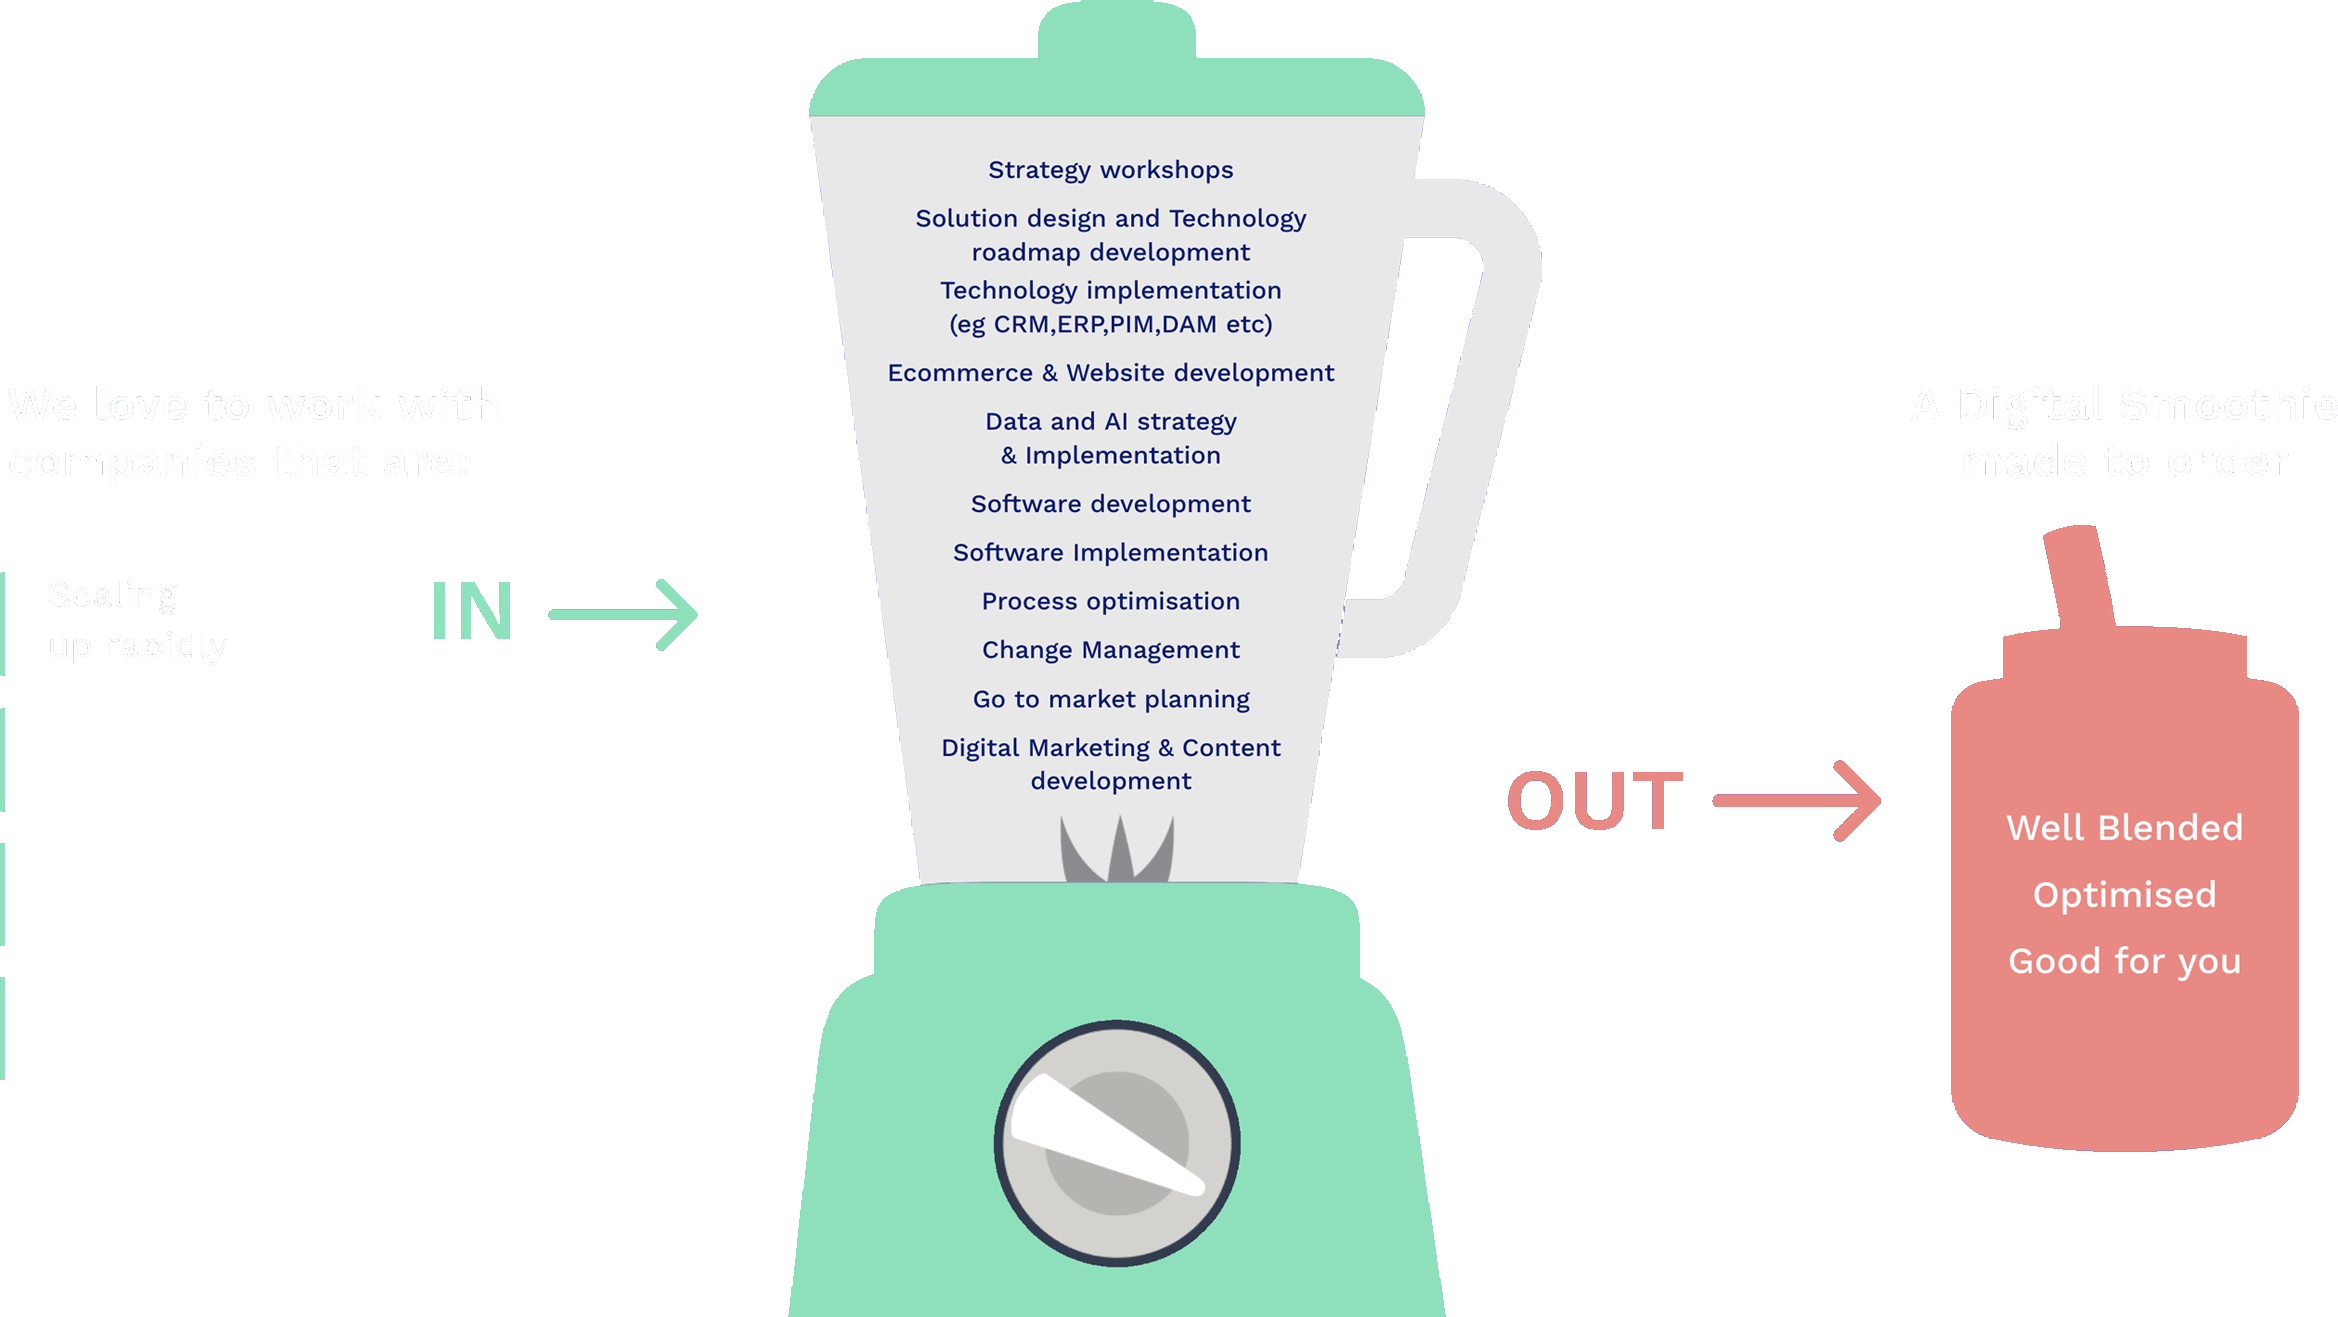 A graphical slide titled 'THE DIGITAL SMOOTHIE BLENDER' illustrates the company's business model. On the left, it states 'We love to work with companies that are: Scaling up rapidly, Revenue generating (>2million/annum), Medium size (Up to 200 employees), Any Industry - although we love the Health sector.' These points lead into a blender graphic labeled 'IN'. Inside the blender, a list includes 'Strategy workshops, Solution design and Technology roadmap development, Technology implementation, E-commerce & Website development, Data and AI strategy & Implementation, Software development, Software Implementation, Process optimisation, Change Management, Go to market planning, Digital Marketing & Content development.' An arrow points from the blender to a smoothie cup graphic on the right, labeled 'OUT', with the result being 'A Digital Smoothie made to order' that is 'Well Blended, Optimised, Good for you'. The slide background is blue, and the content is arranged in a visually balanced manner.